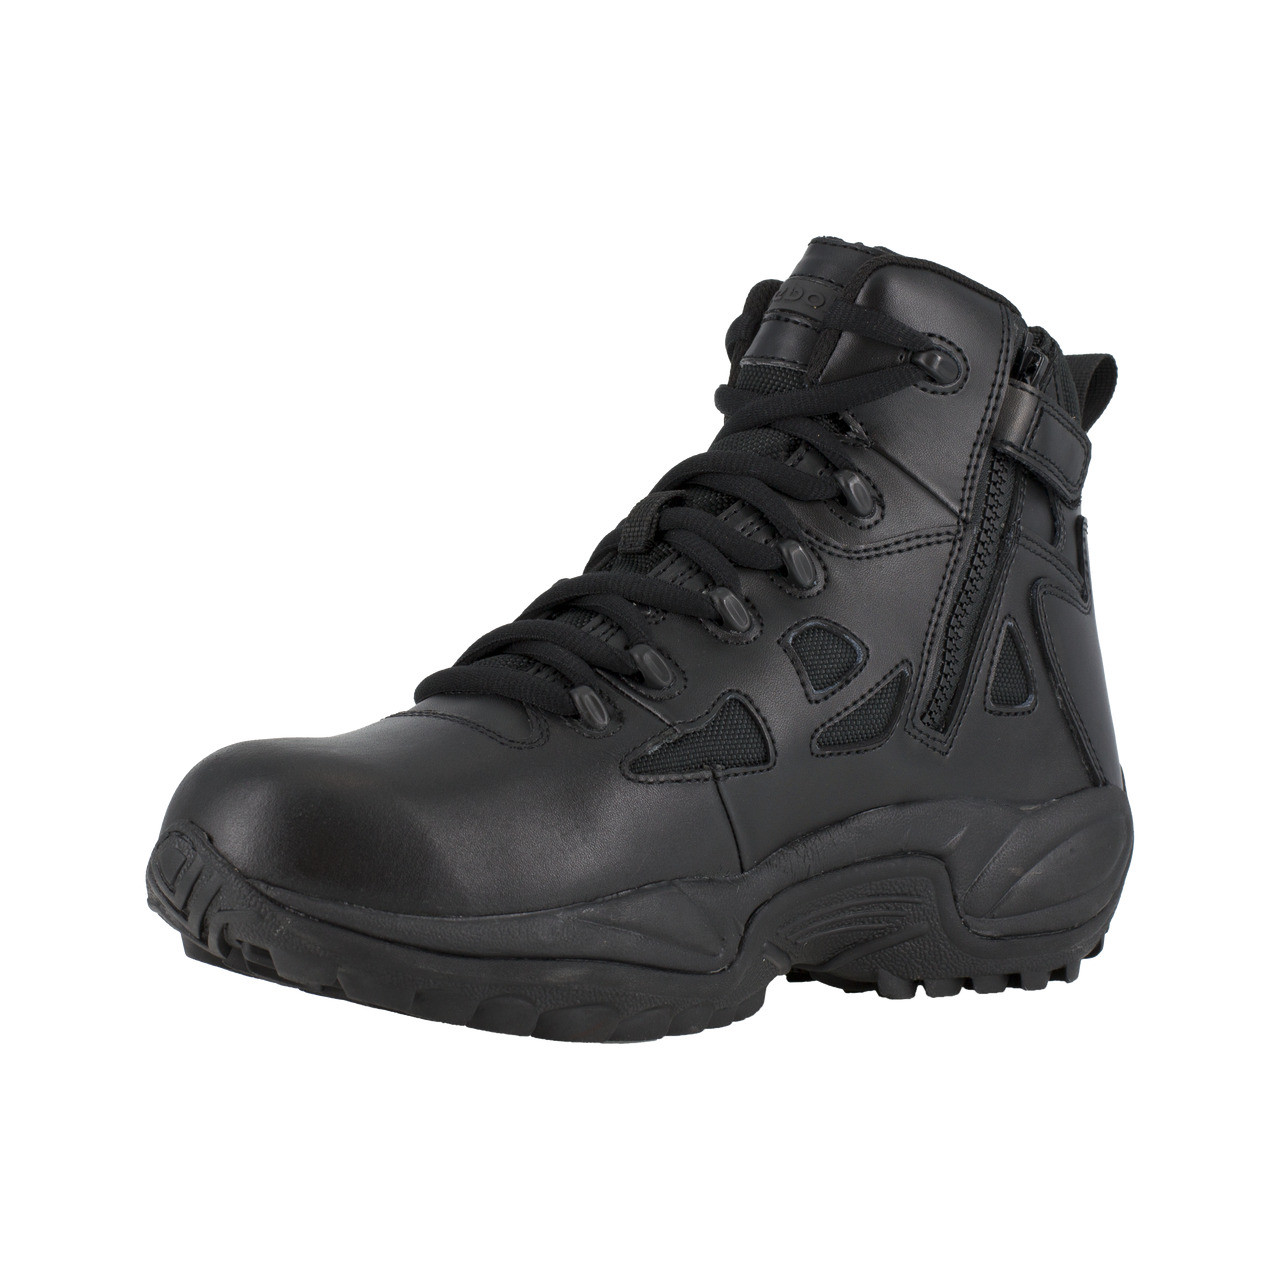 REEBOK BLACK 6" STEALTH BOOT SIDE ZIP SOFT TOE BOOTS RB8688